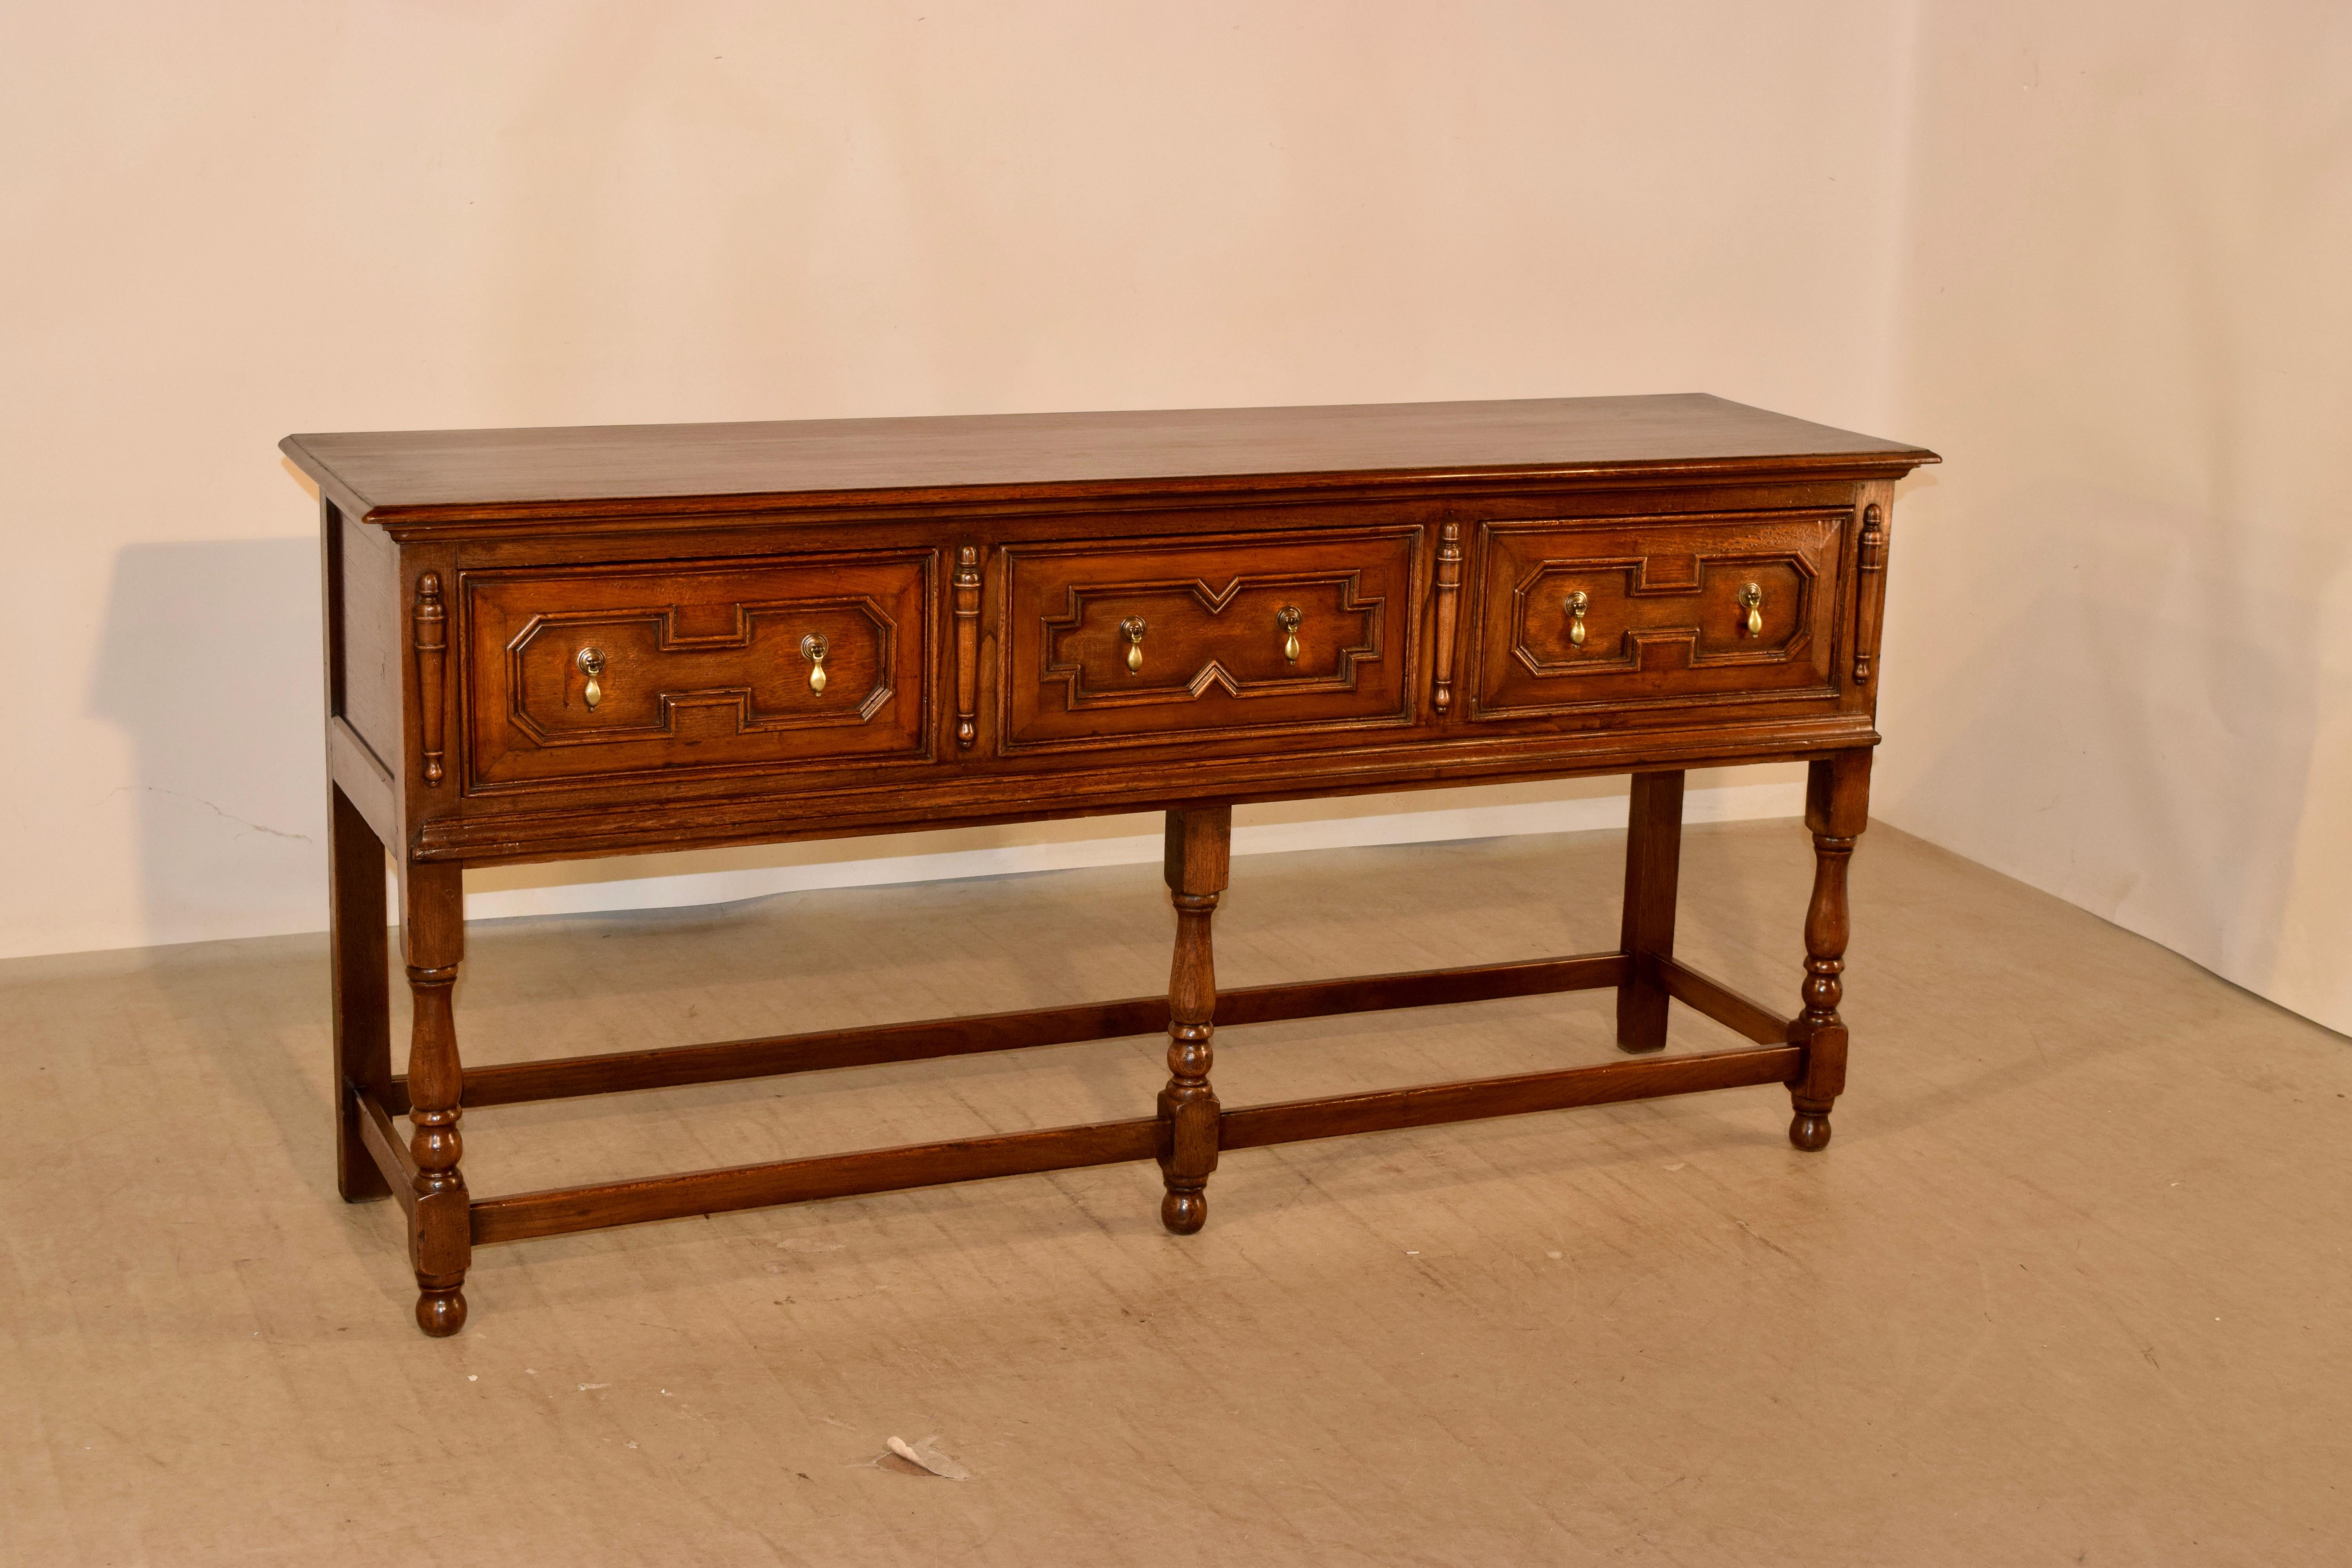 Late 19th century sideboard from England with a beveled edge around the top, following down to paneled sides and two drawers in the front, which have raised geometric panels, and are flanked by applied half turnings. The lower edge of the case is